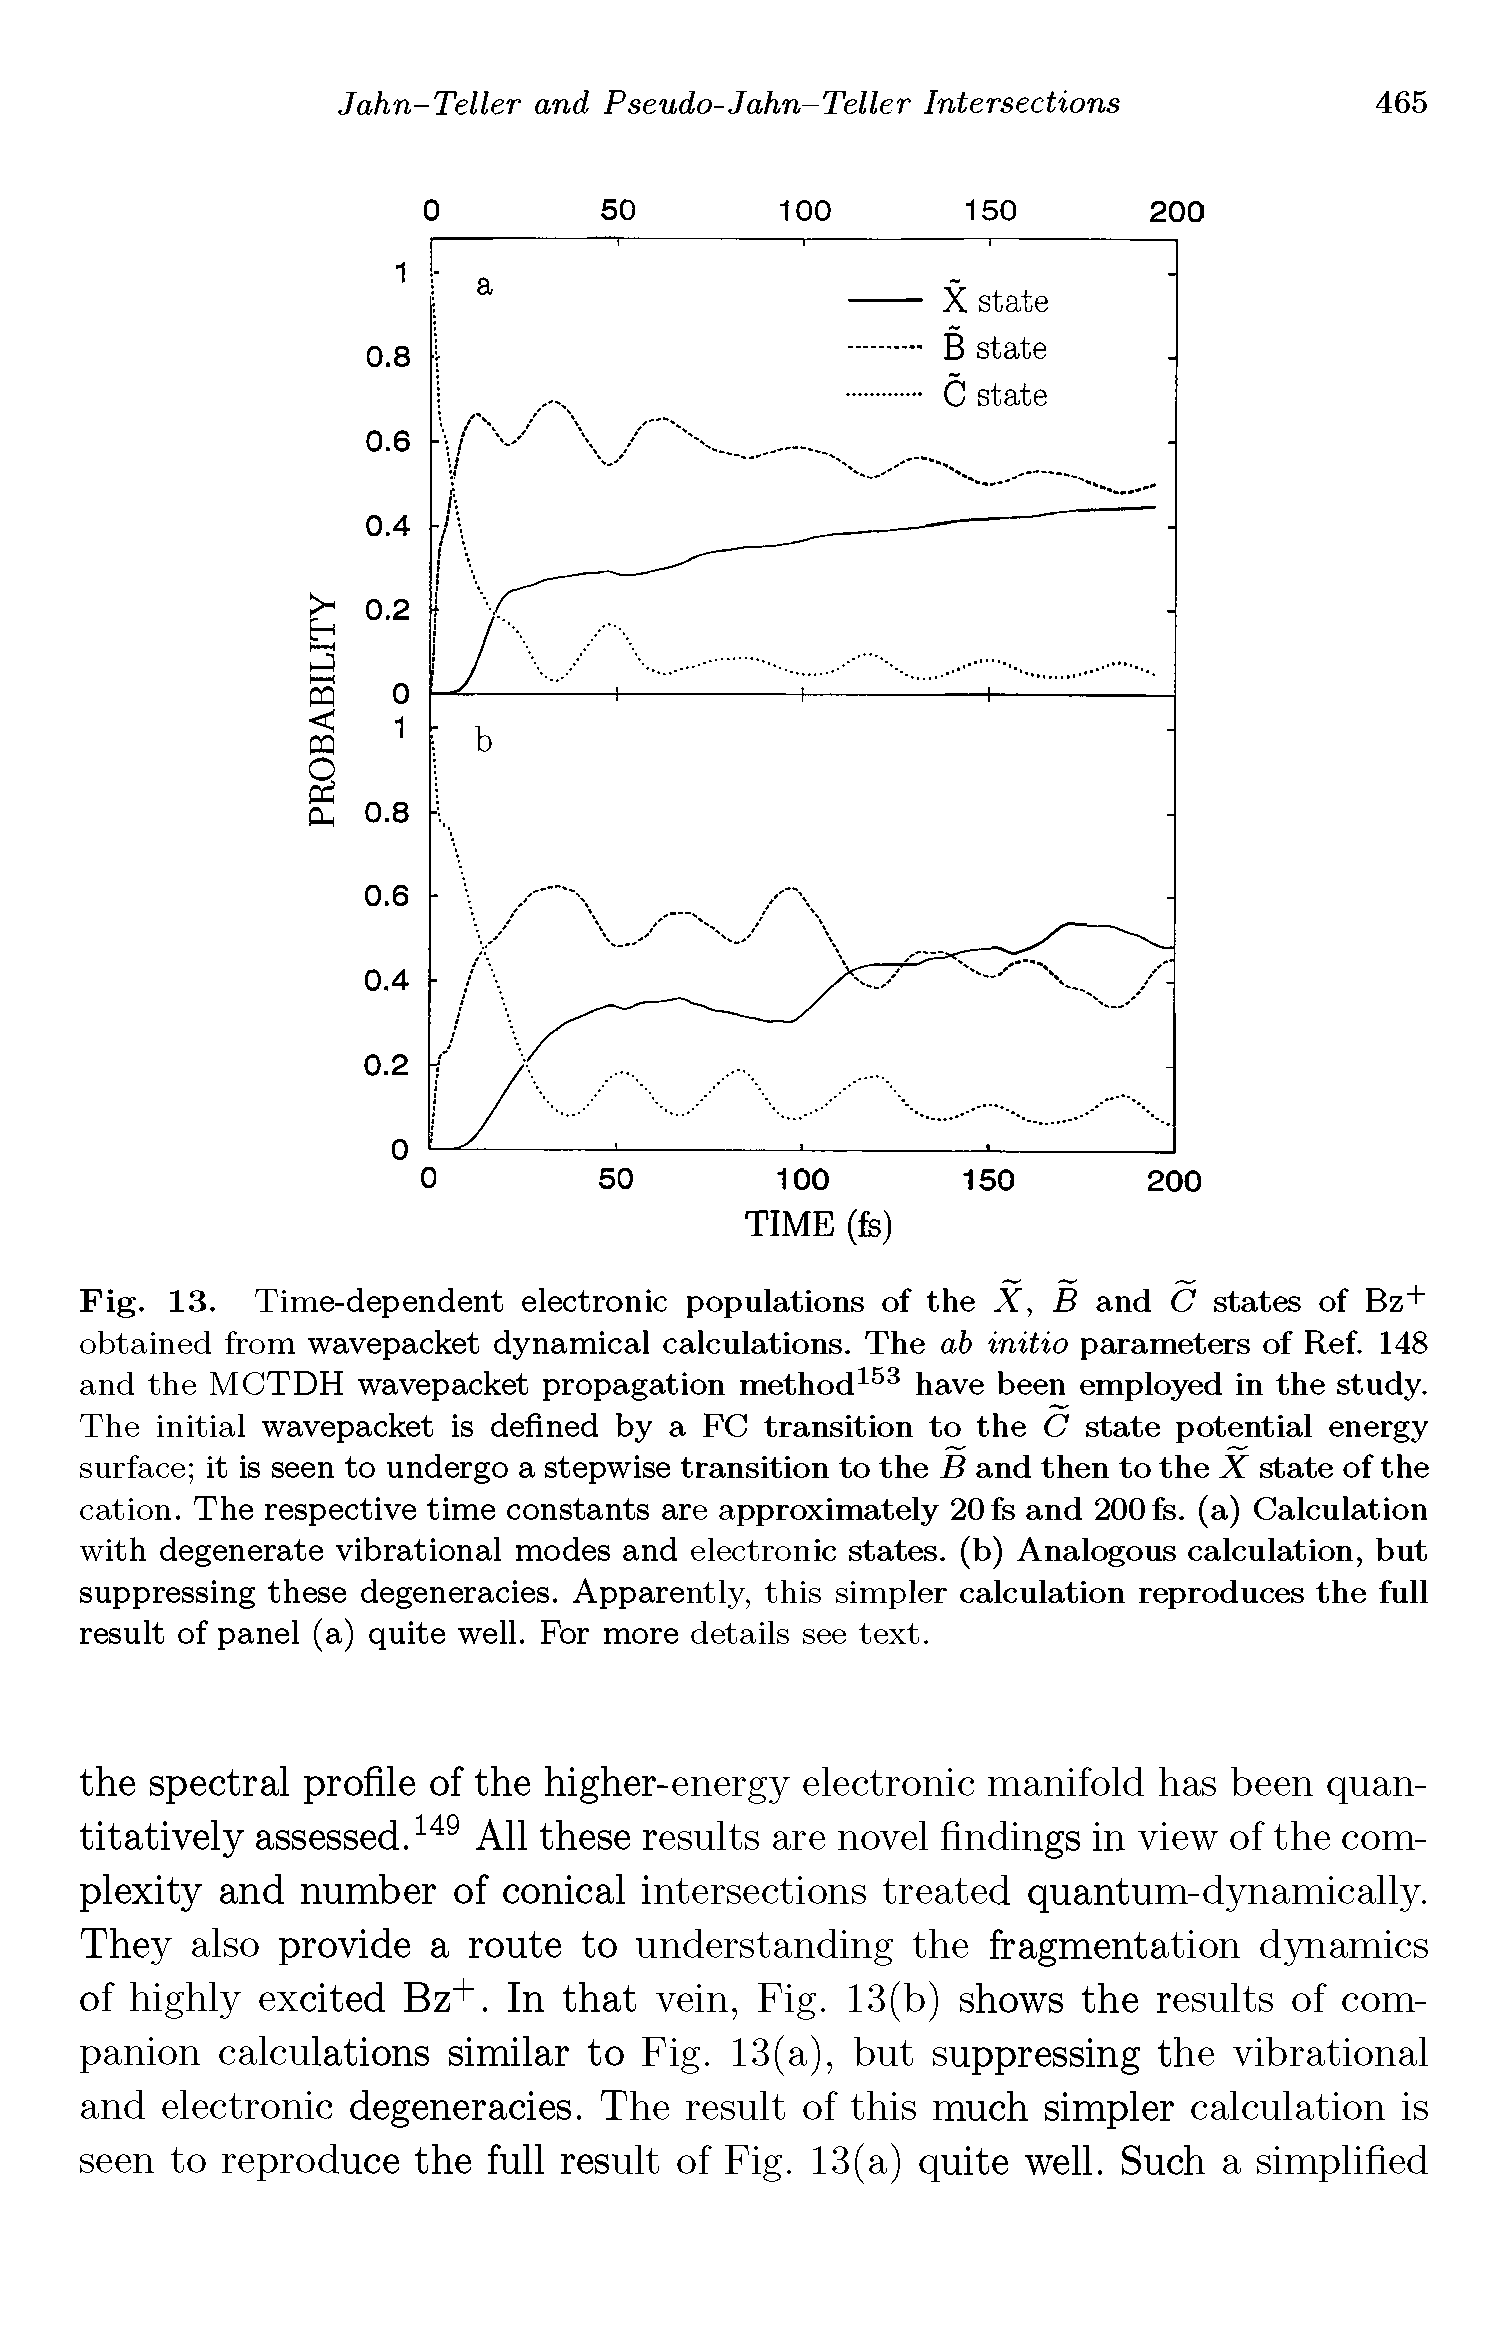 Fig. 13. Time-dependent electronic populations of the X, B and C states of Bz+ obtained from wavepacket dynamical calculations. The ab initio parameters of Ref. 148 and the MGTDH wavepacket propagation method have been employed in the study. The initial wavepacket is defined by a FC transition to the C state potential energy surface it is seen to undergo a stepwise transition to the B and then to the X state of the cation. The respective time constants are approximately 20fs and 200fs. (a) Calculation with degenerate vibrational modes and electronic states, (b) Analogous calculation, but suppressing these degeneracies. Apparently, this simpler calculation reproduces the full result of panel (a) quite well. For more details see text.